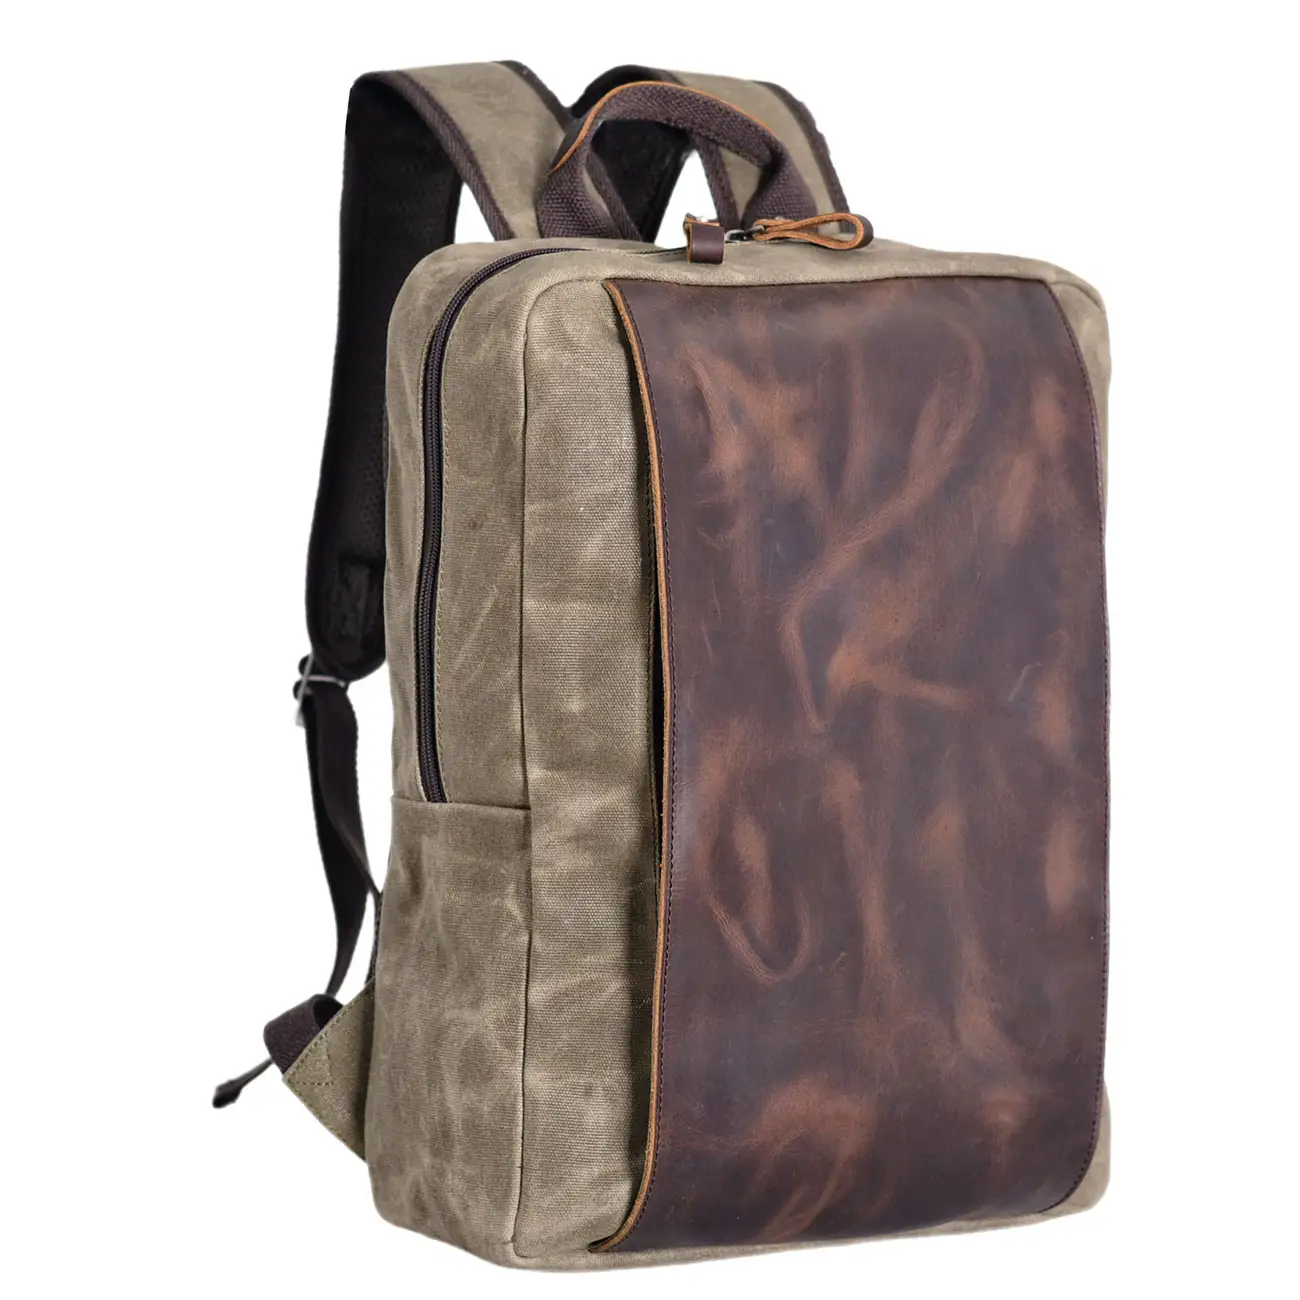 Outdoor Travel Hiking Backpack Casual Fashion Men's Bag Batik Canvas Cowhide Backpack Retro Trend Casual Backpacks